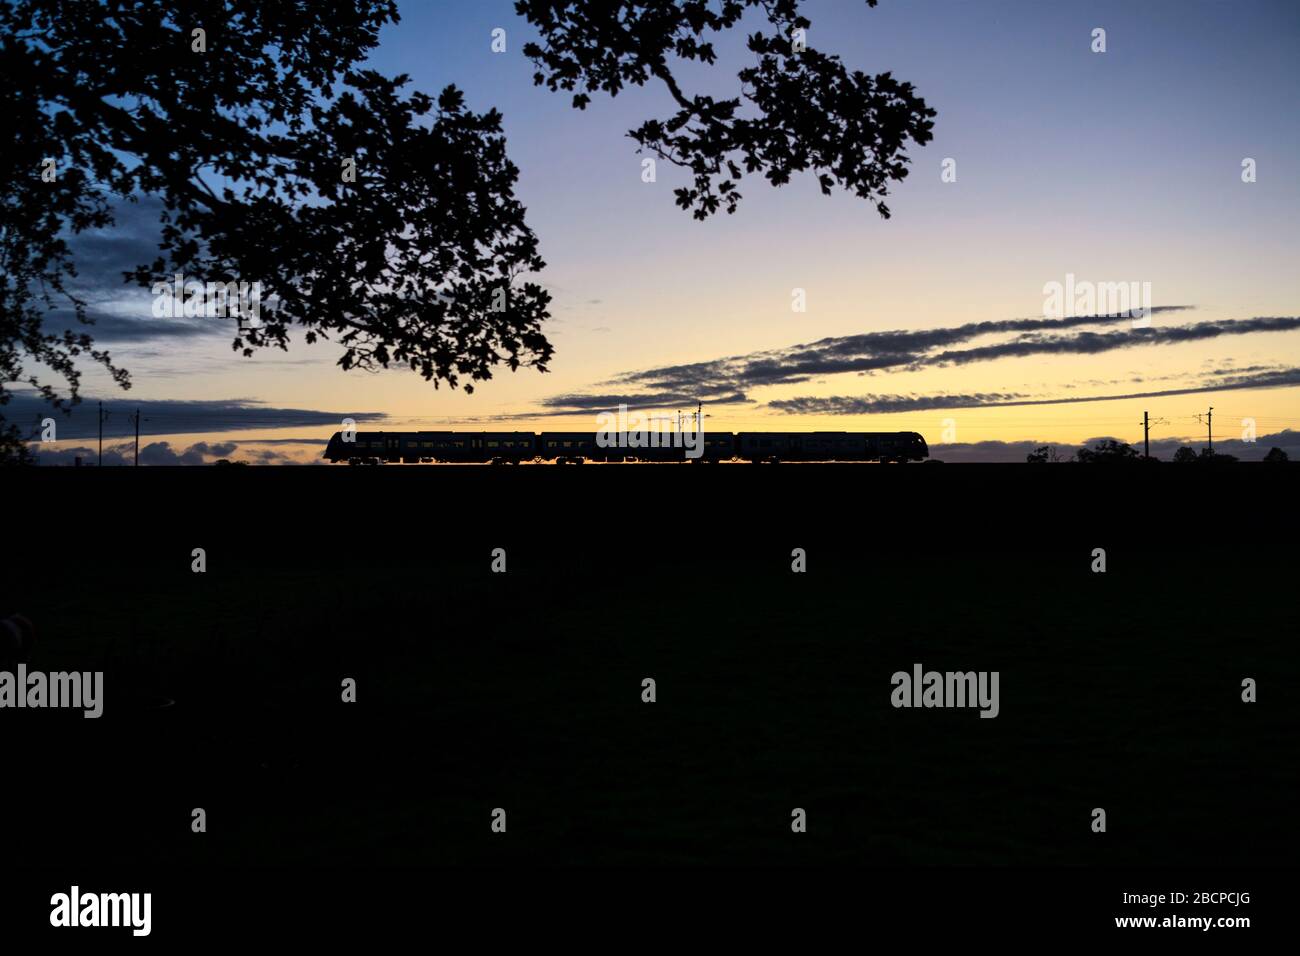 Northern Rail / Northern Trains CAF Civity class 195 train on the west coast mainline at sunset making a silhouette. Stock Photo